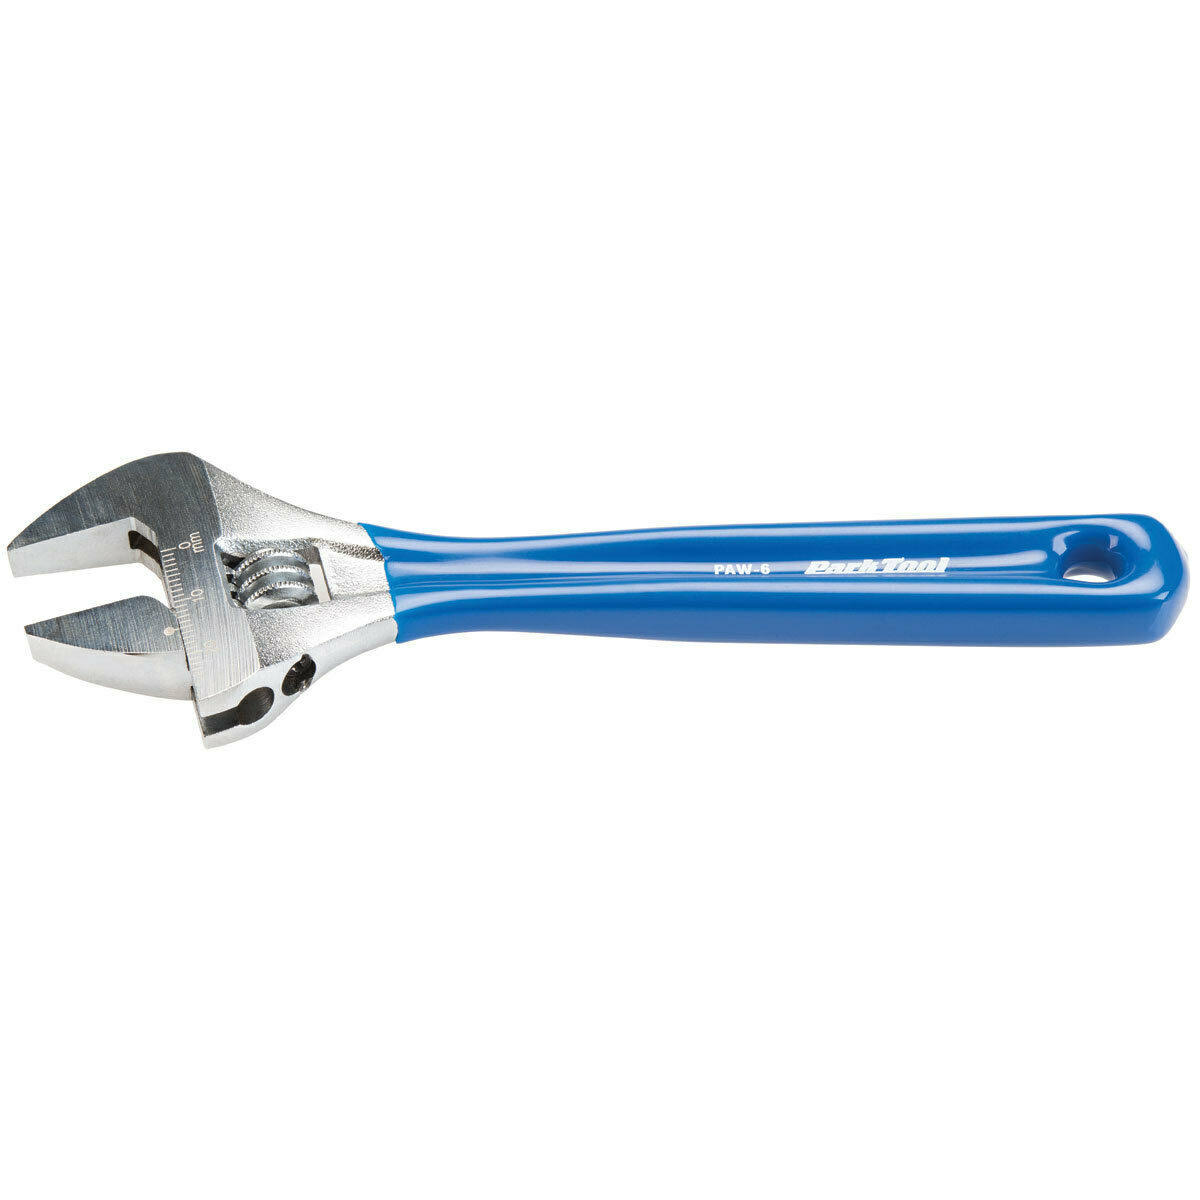 Park Tool Paw-6 Adjustable Wrench - 6"